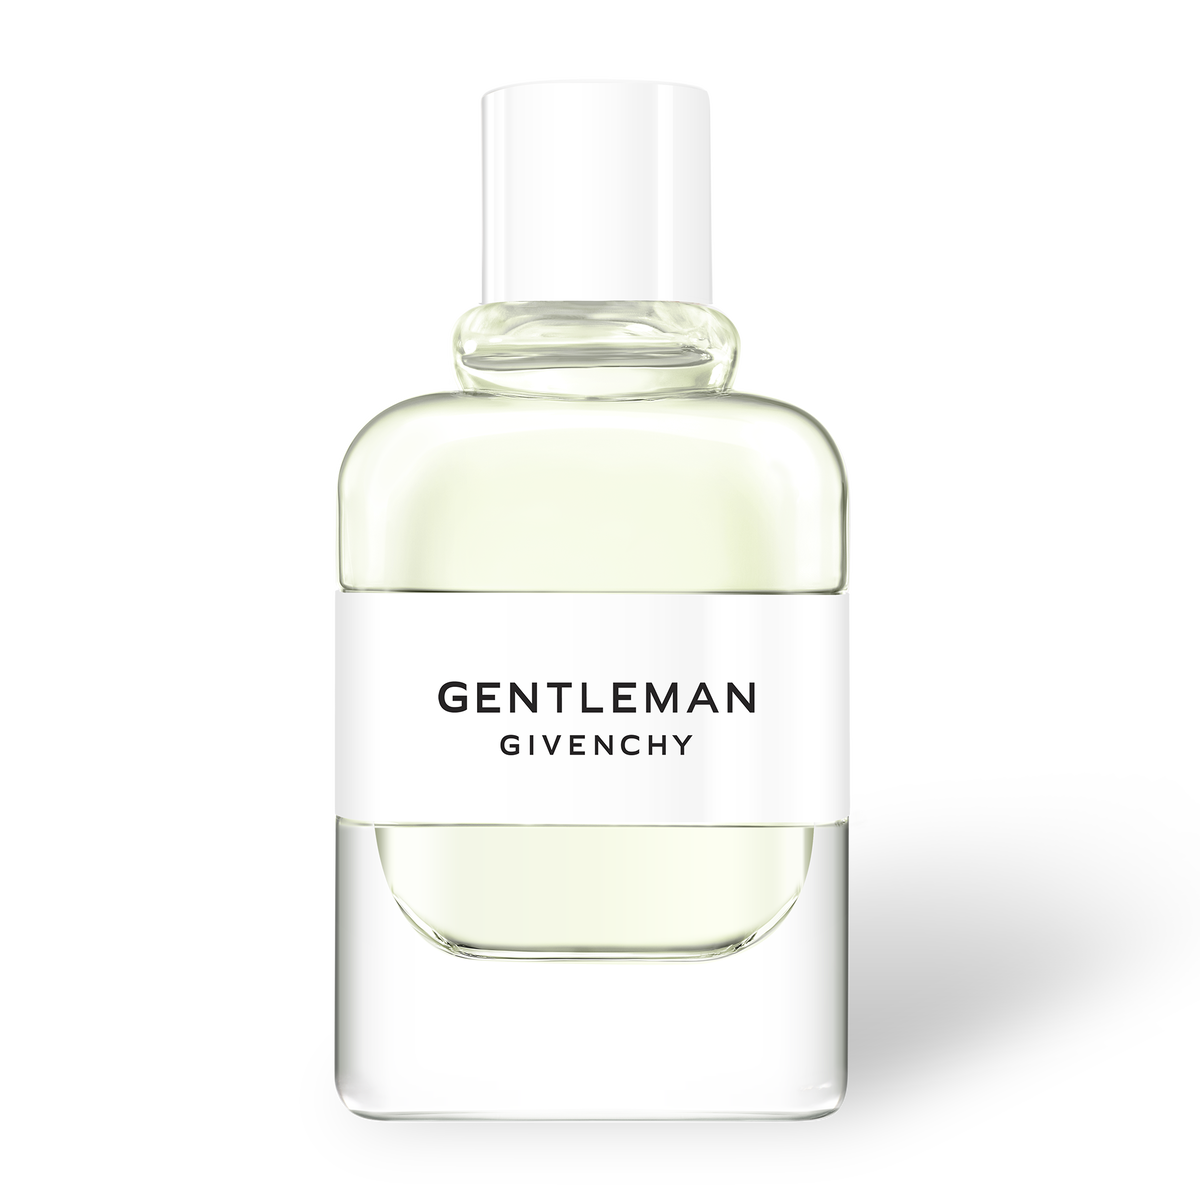 GENTLEMAN GIVENCHY COLOGNE